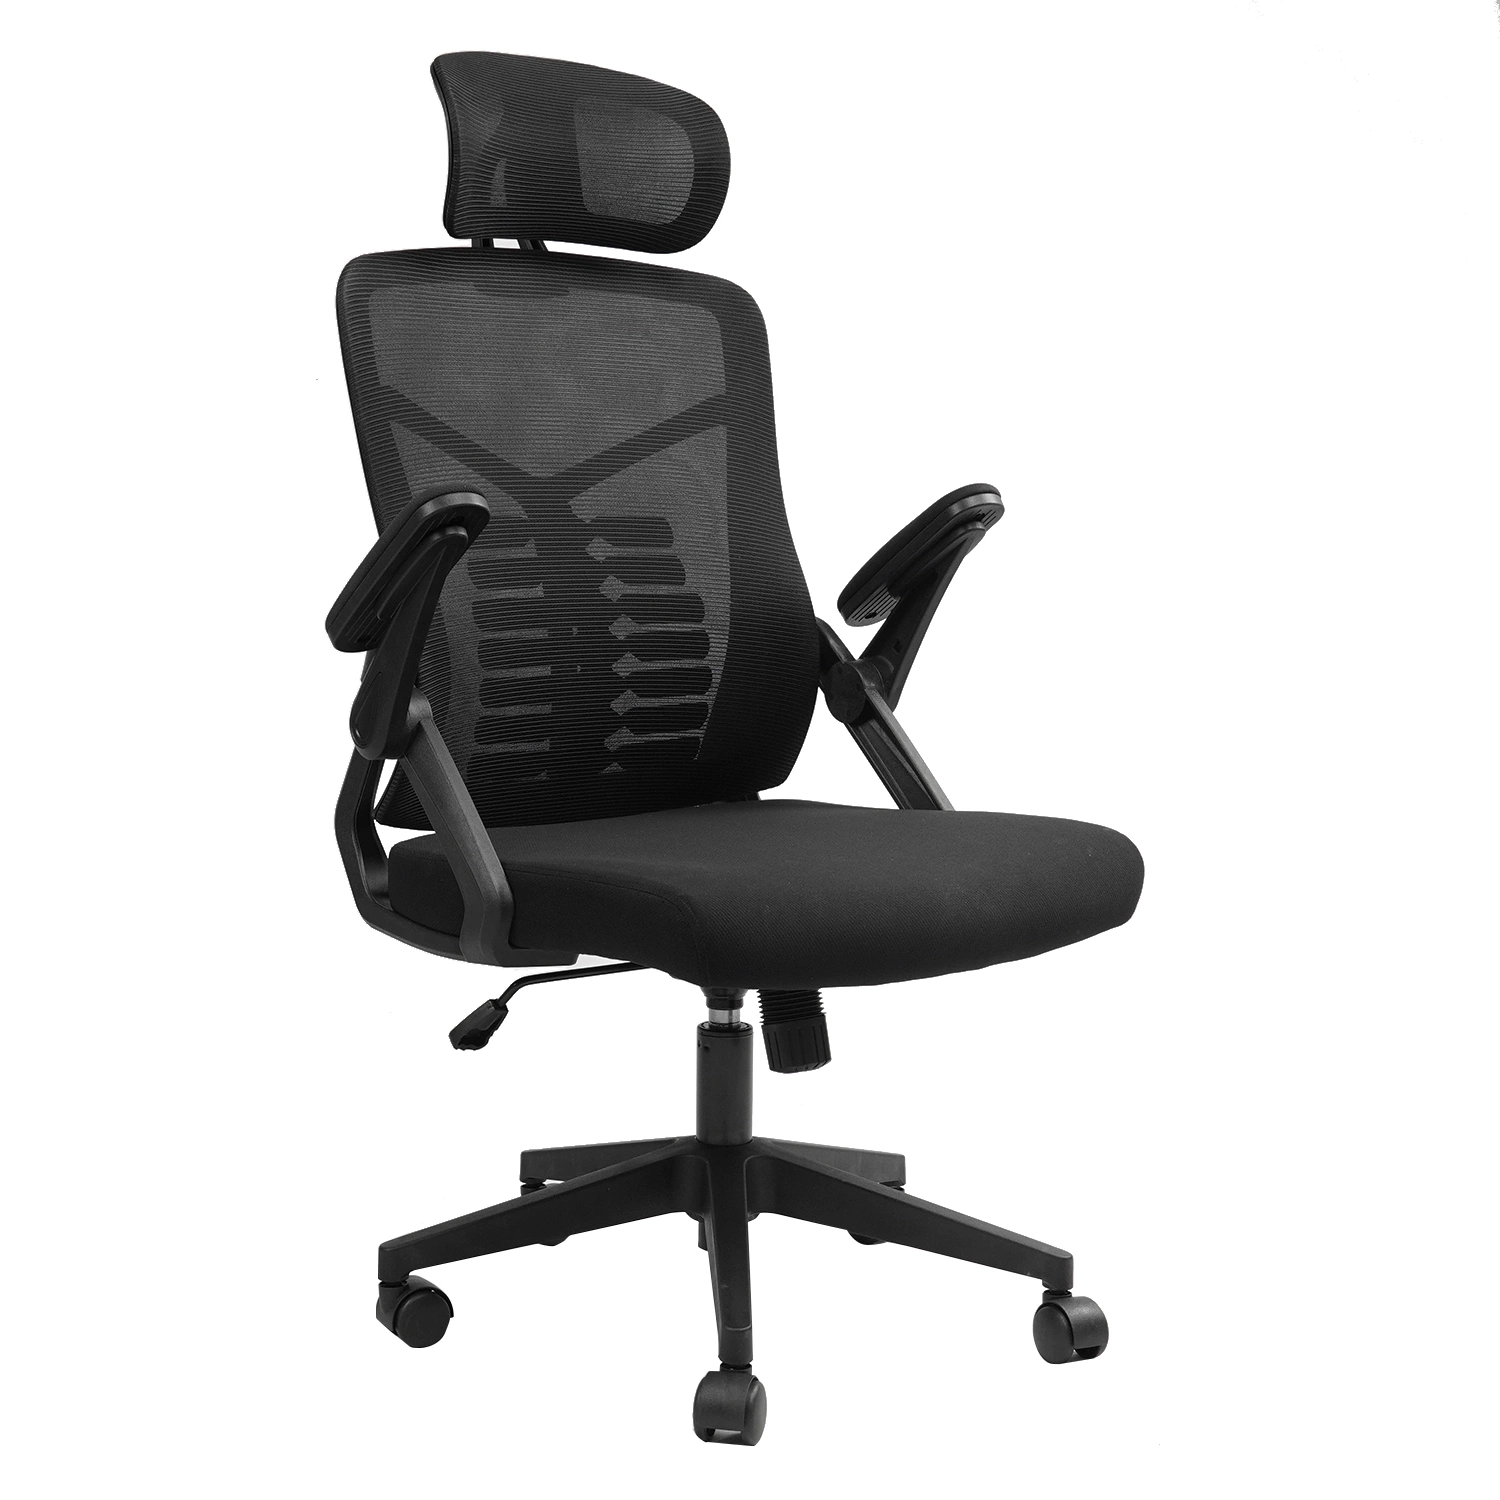 Mesh Office Chair, Ergonomic Desk Chair with Adjustable Lumbar Support & Flip-up Armrest, Comfort Wide Seat, High-Back Computer Task Chair